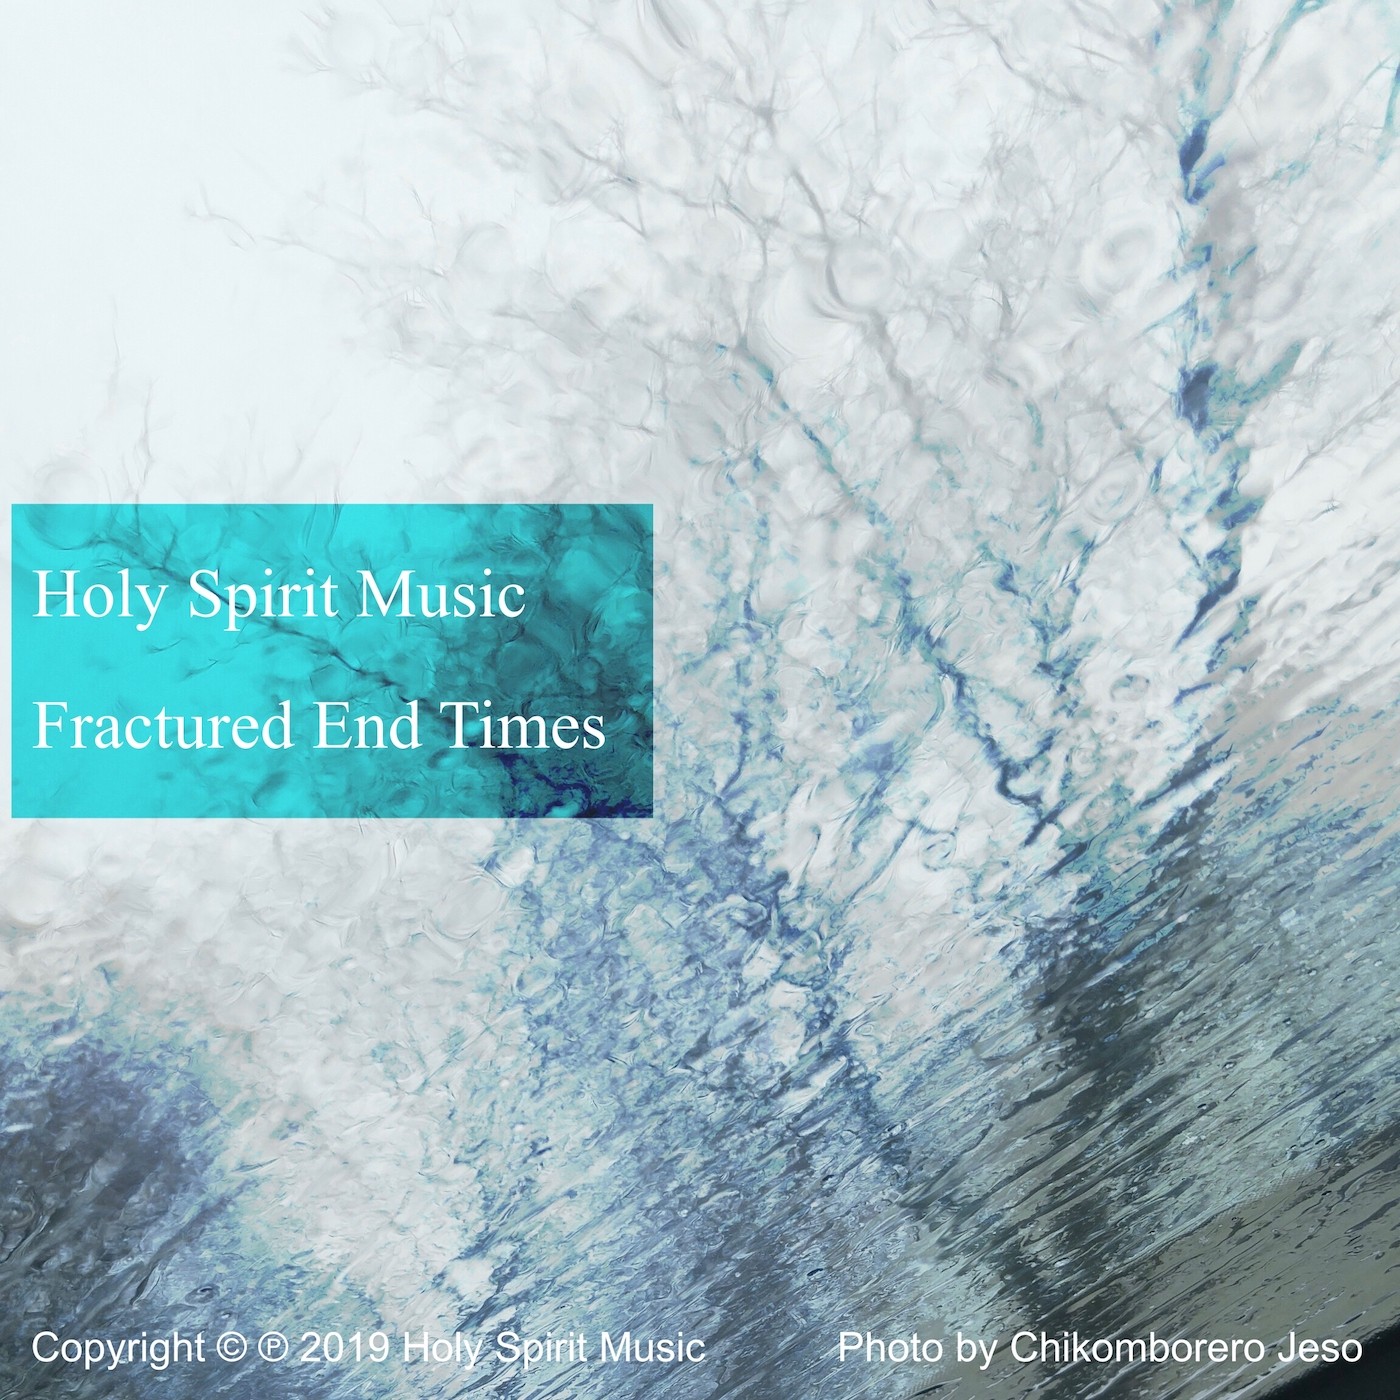 Holy Spirit Music - Fractured End Times - Music Cover Art